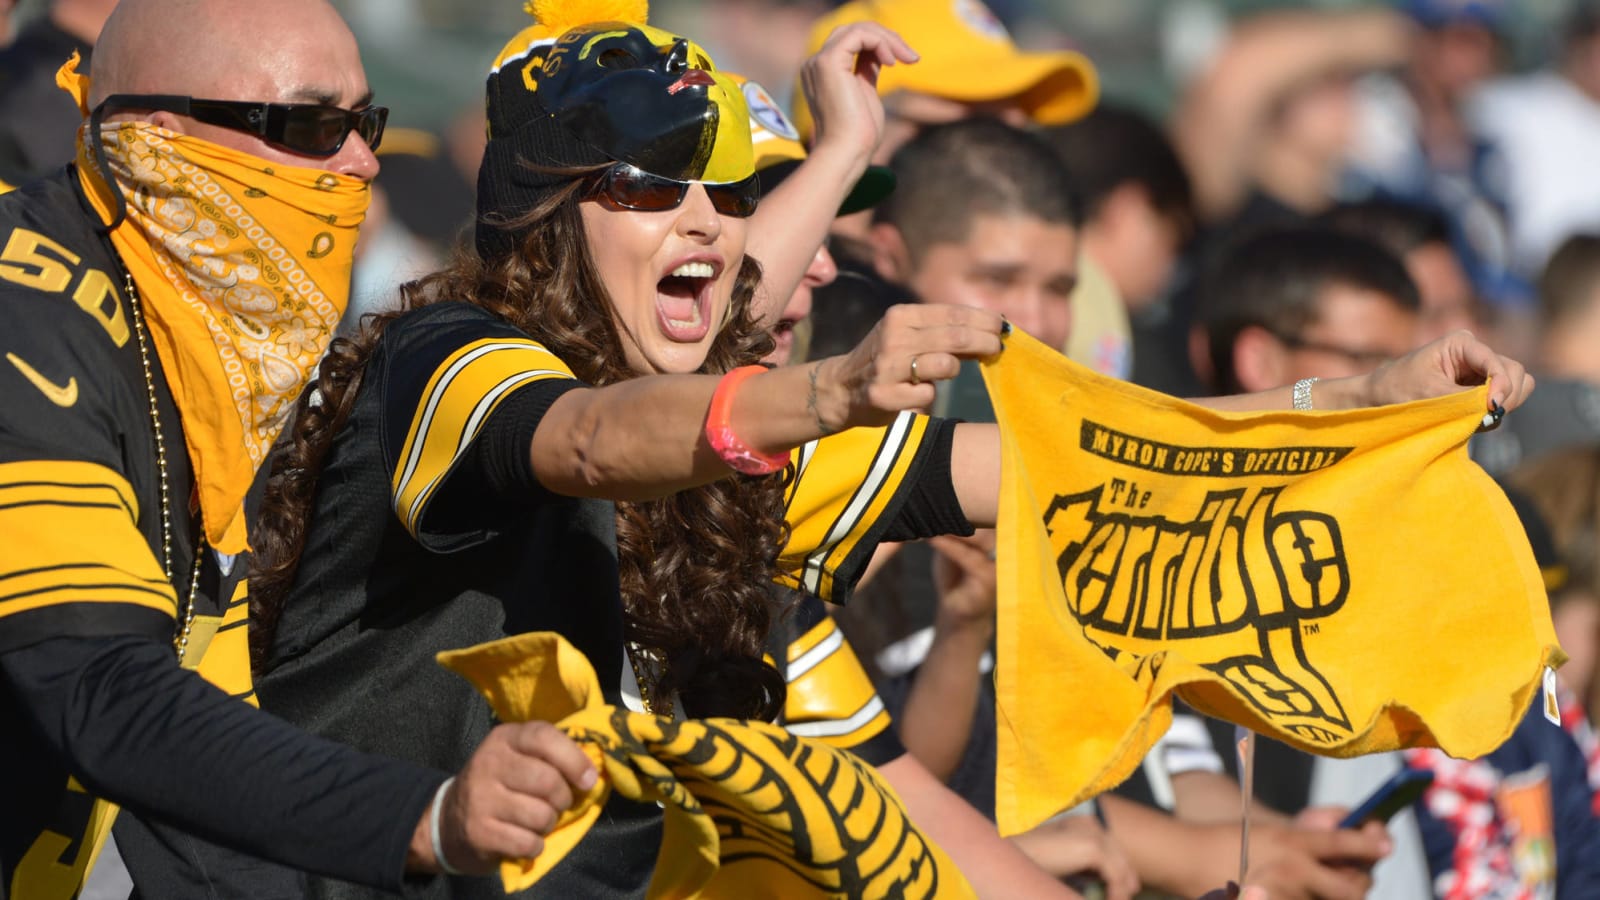 Watch: Steelers fans take over Chargers stadium for ‘SNF’